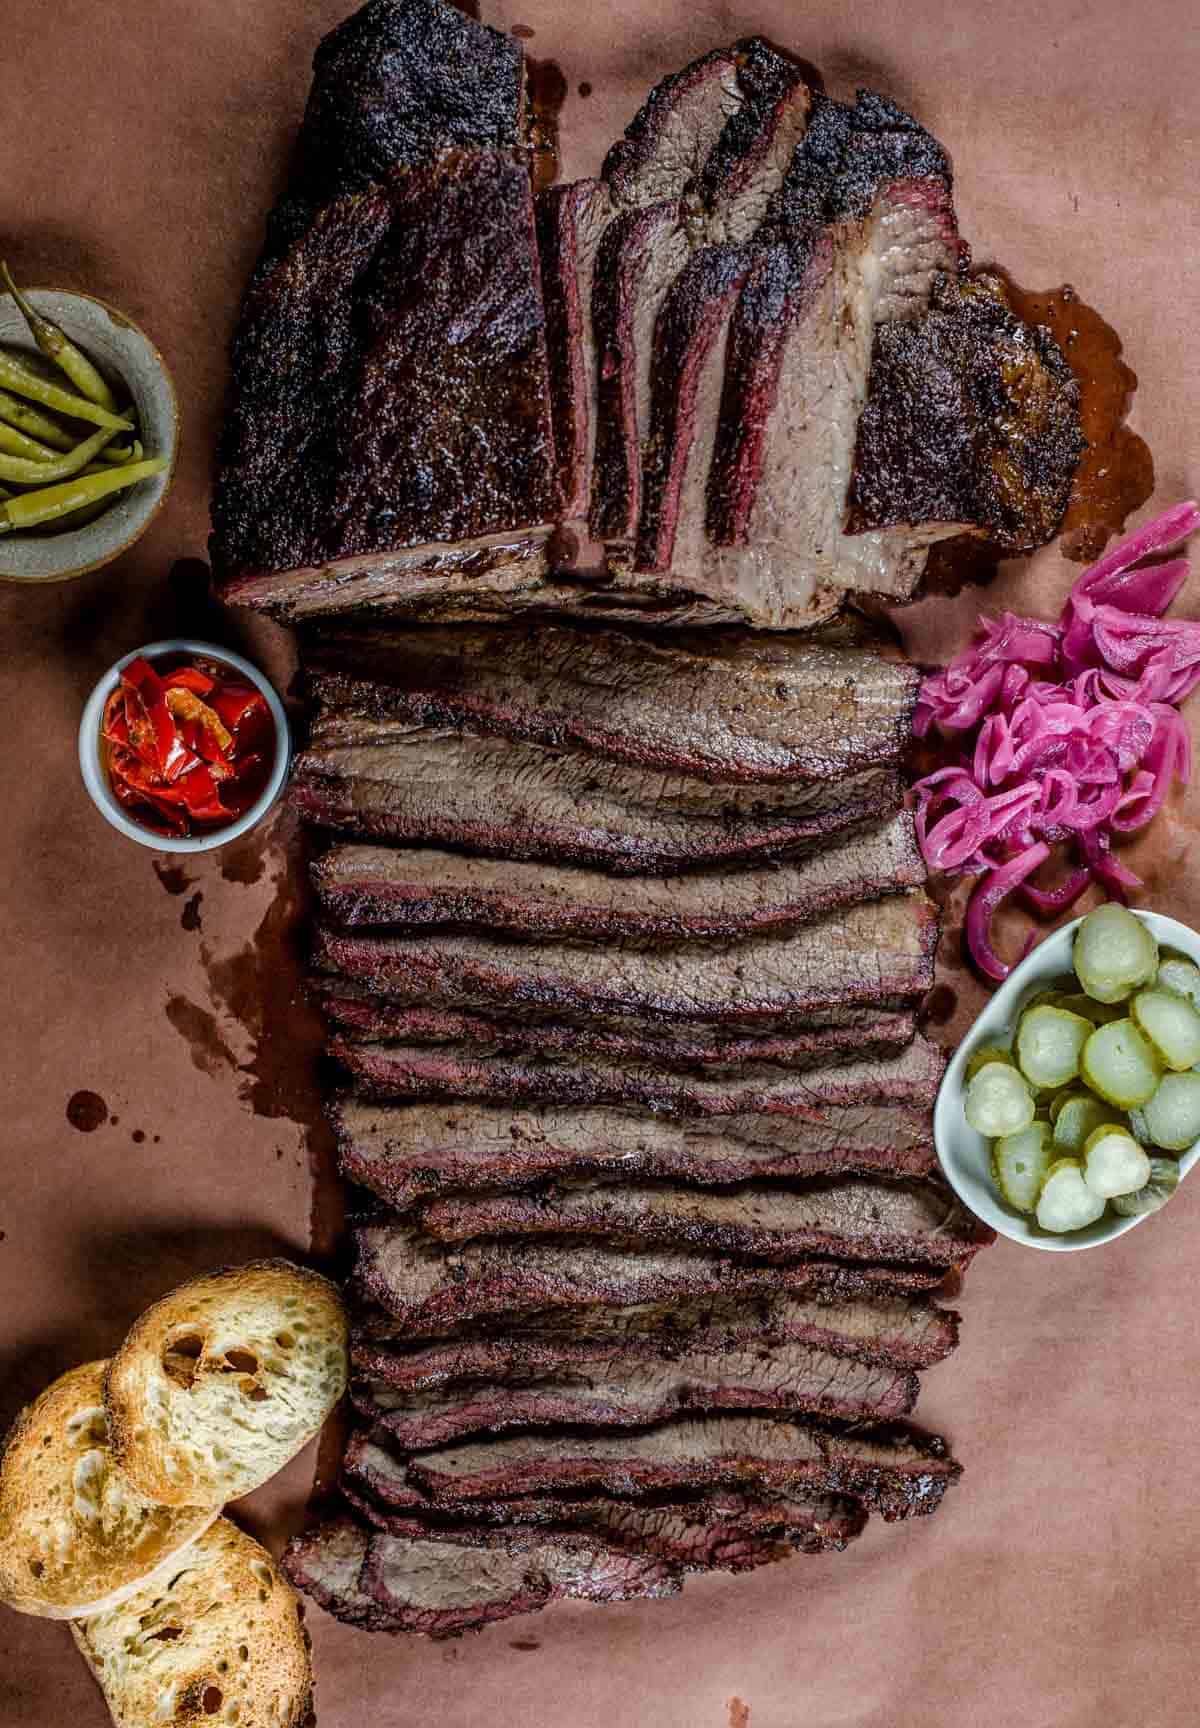 Slices of Smoked Brisket served on butcher paper